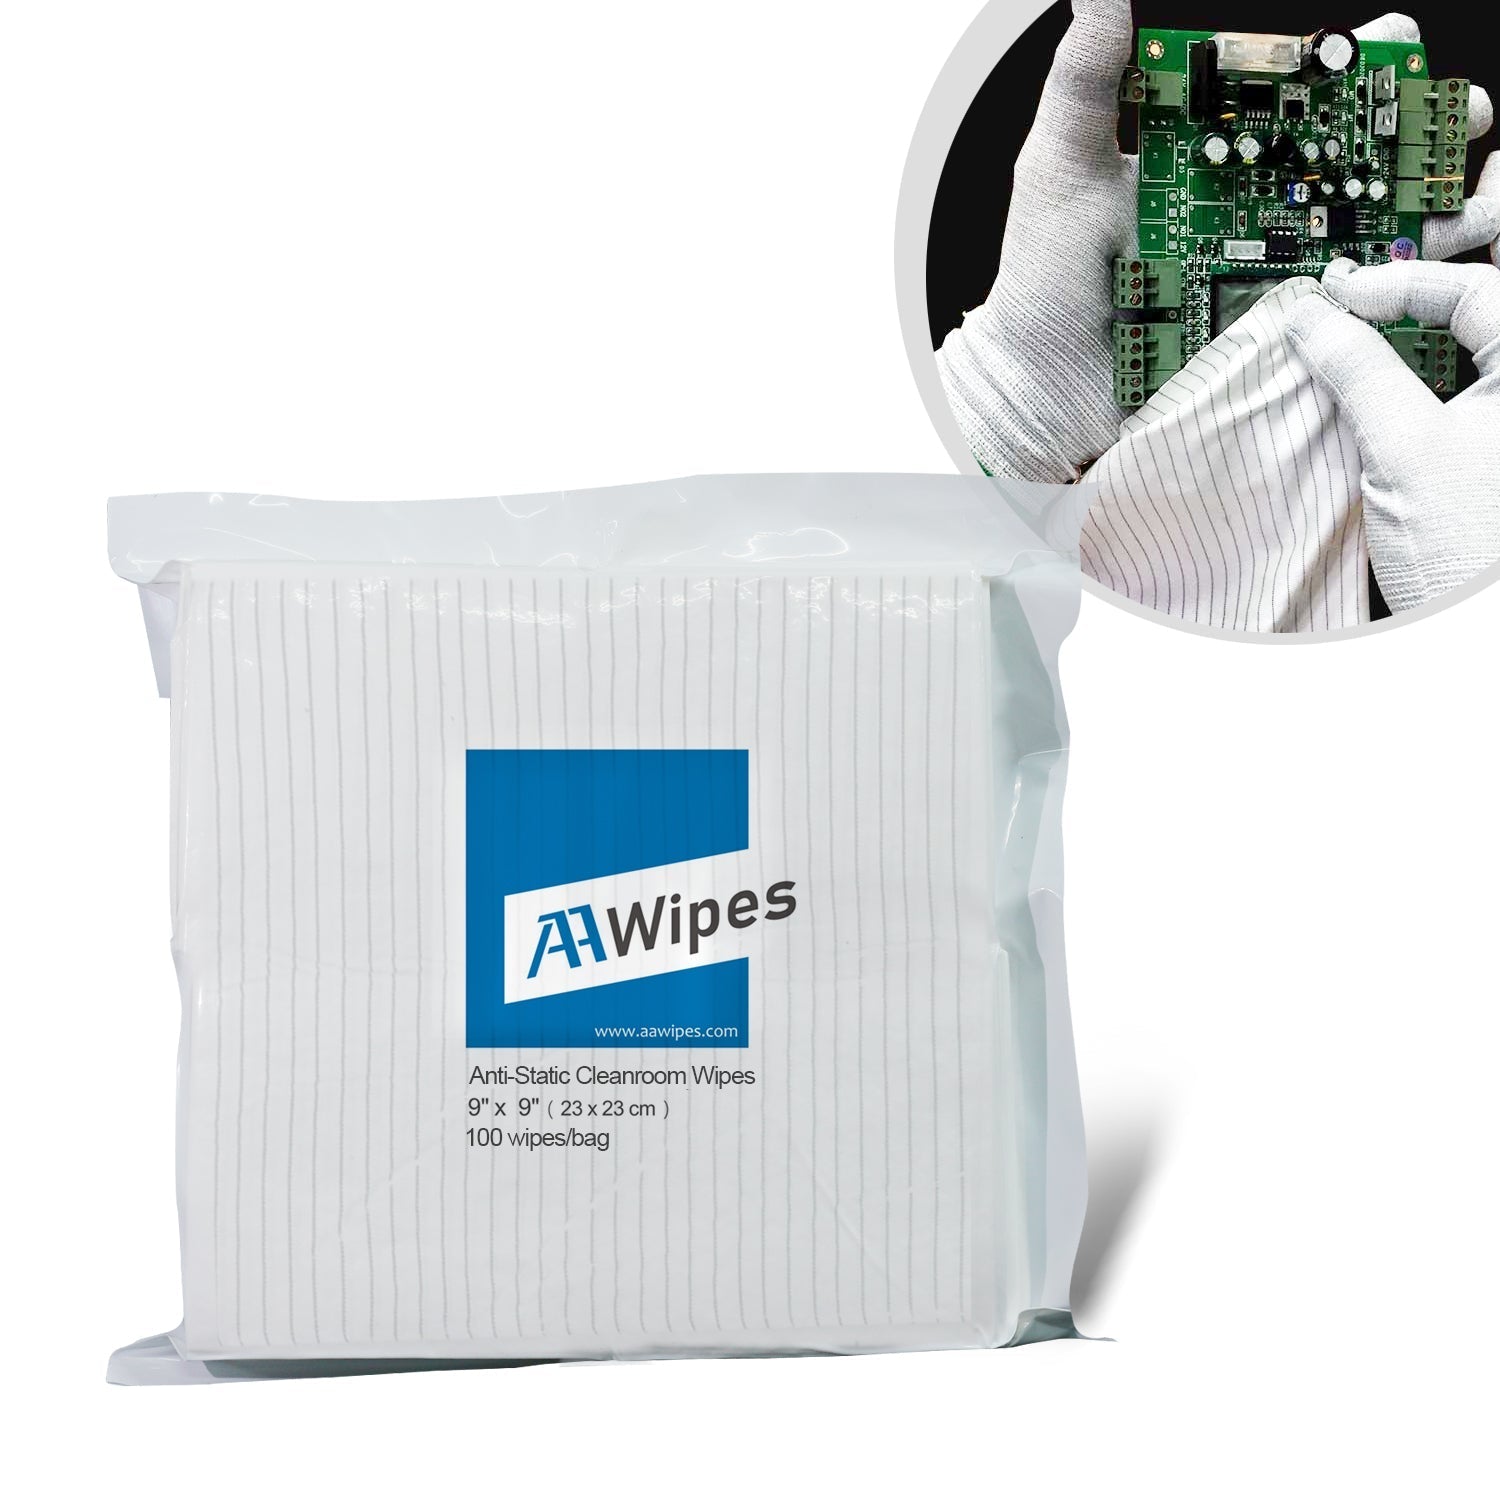 Semiconductor ESD Cleanroom Wipes With Conductive Yarn Electronic Compoment Metal Wiping Anti-Static ESD Wipes 9"x9" for Equipment Maintanence. 2000wipes/box, 20 bags (No. CE16009)